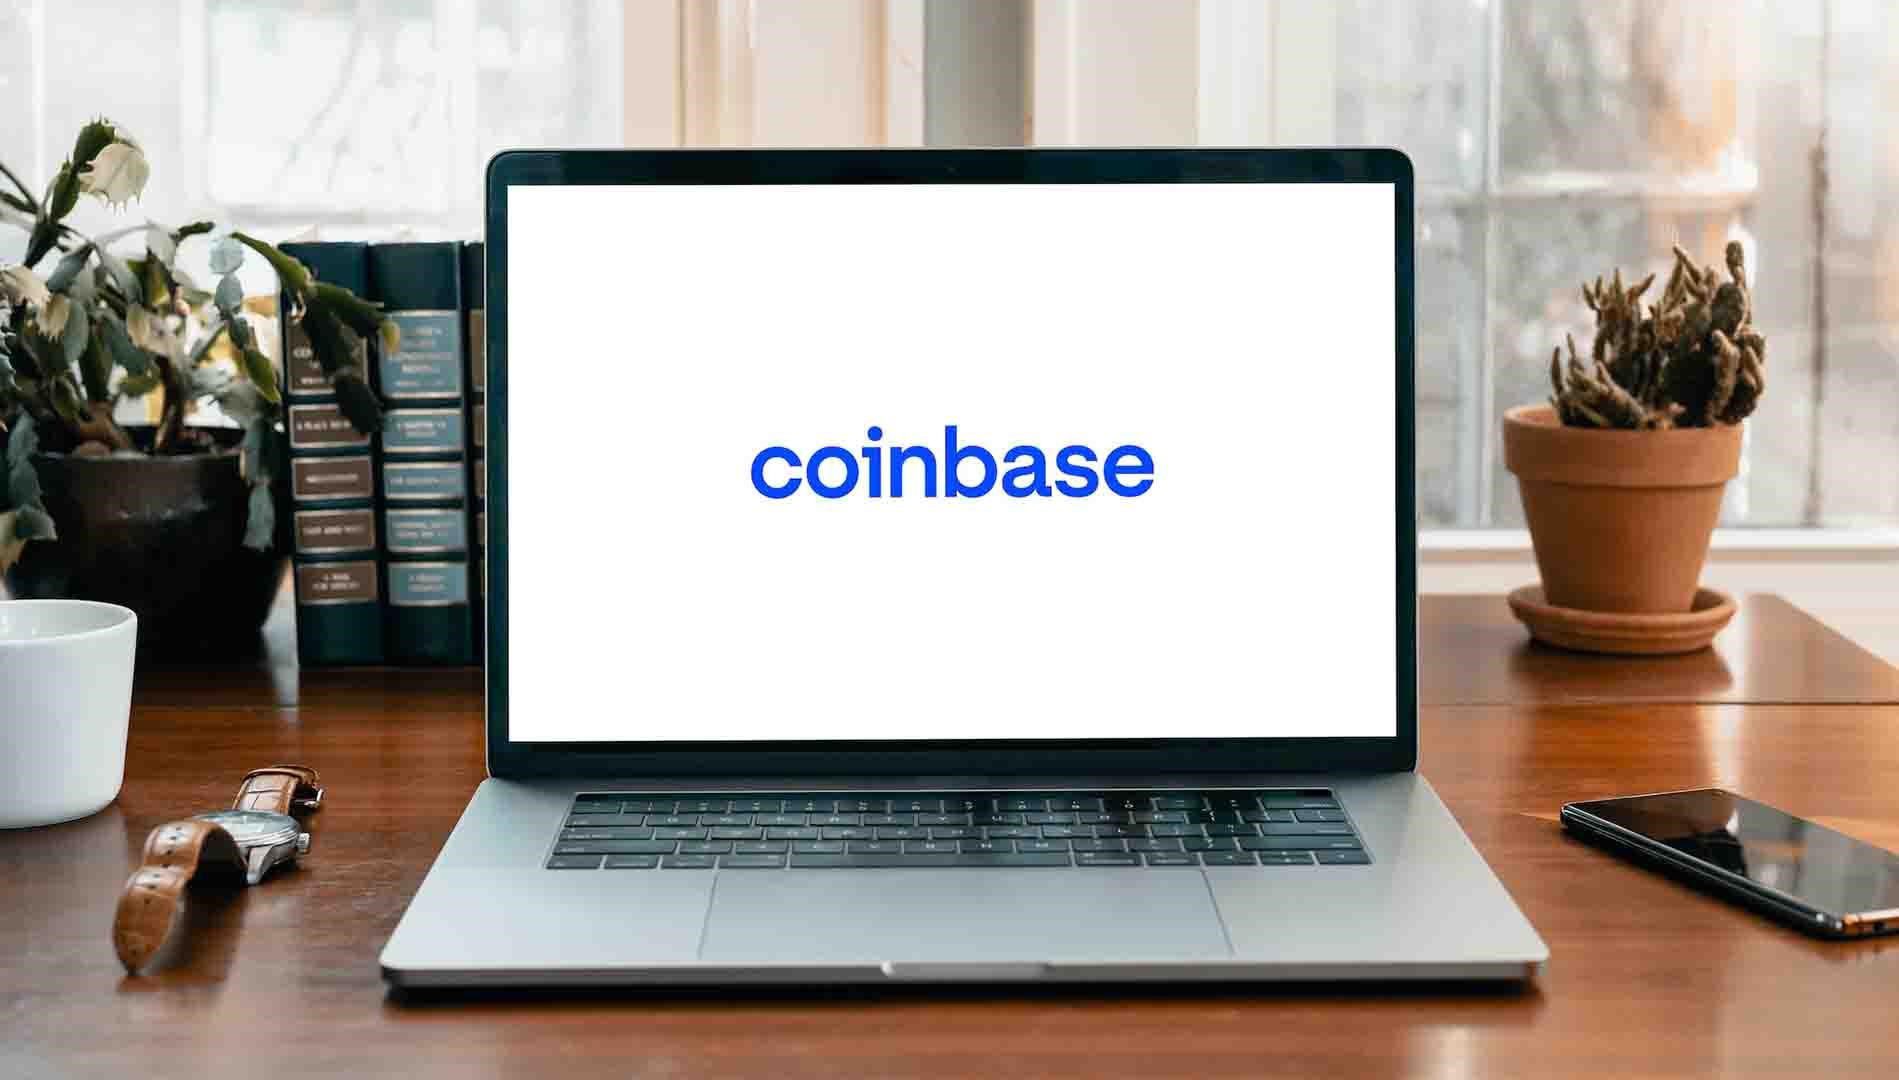 Image of a laptop with the coinbase logo on the screen